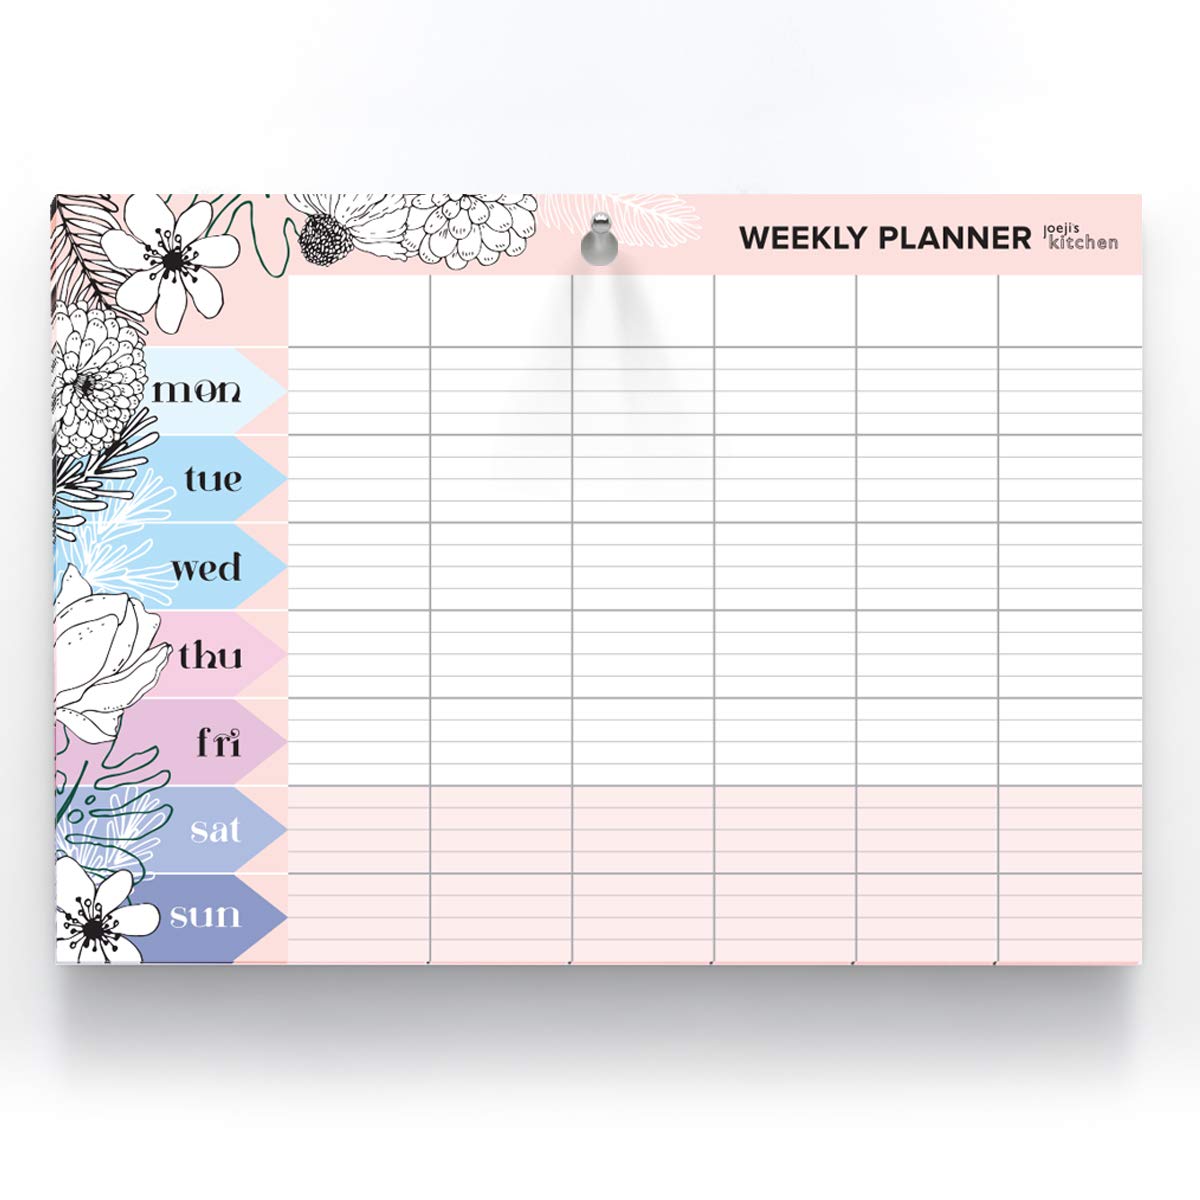 Joeji's Kitchen Weekly Planner Pad Tear Off Sheets 60 Pages, Meal Planner Pad - Punched Hole for Hanging Plan Your Weekly Desk Planner Board for organising and Productivity Planning